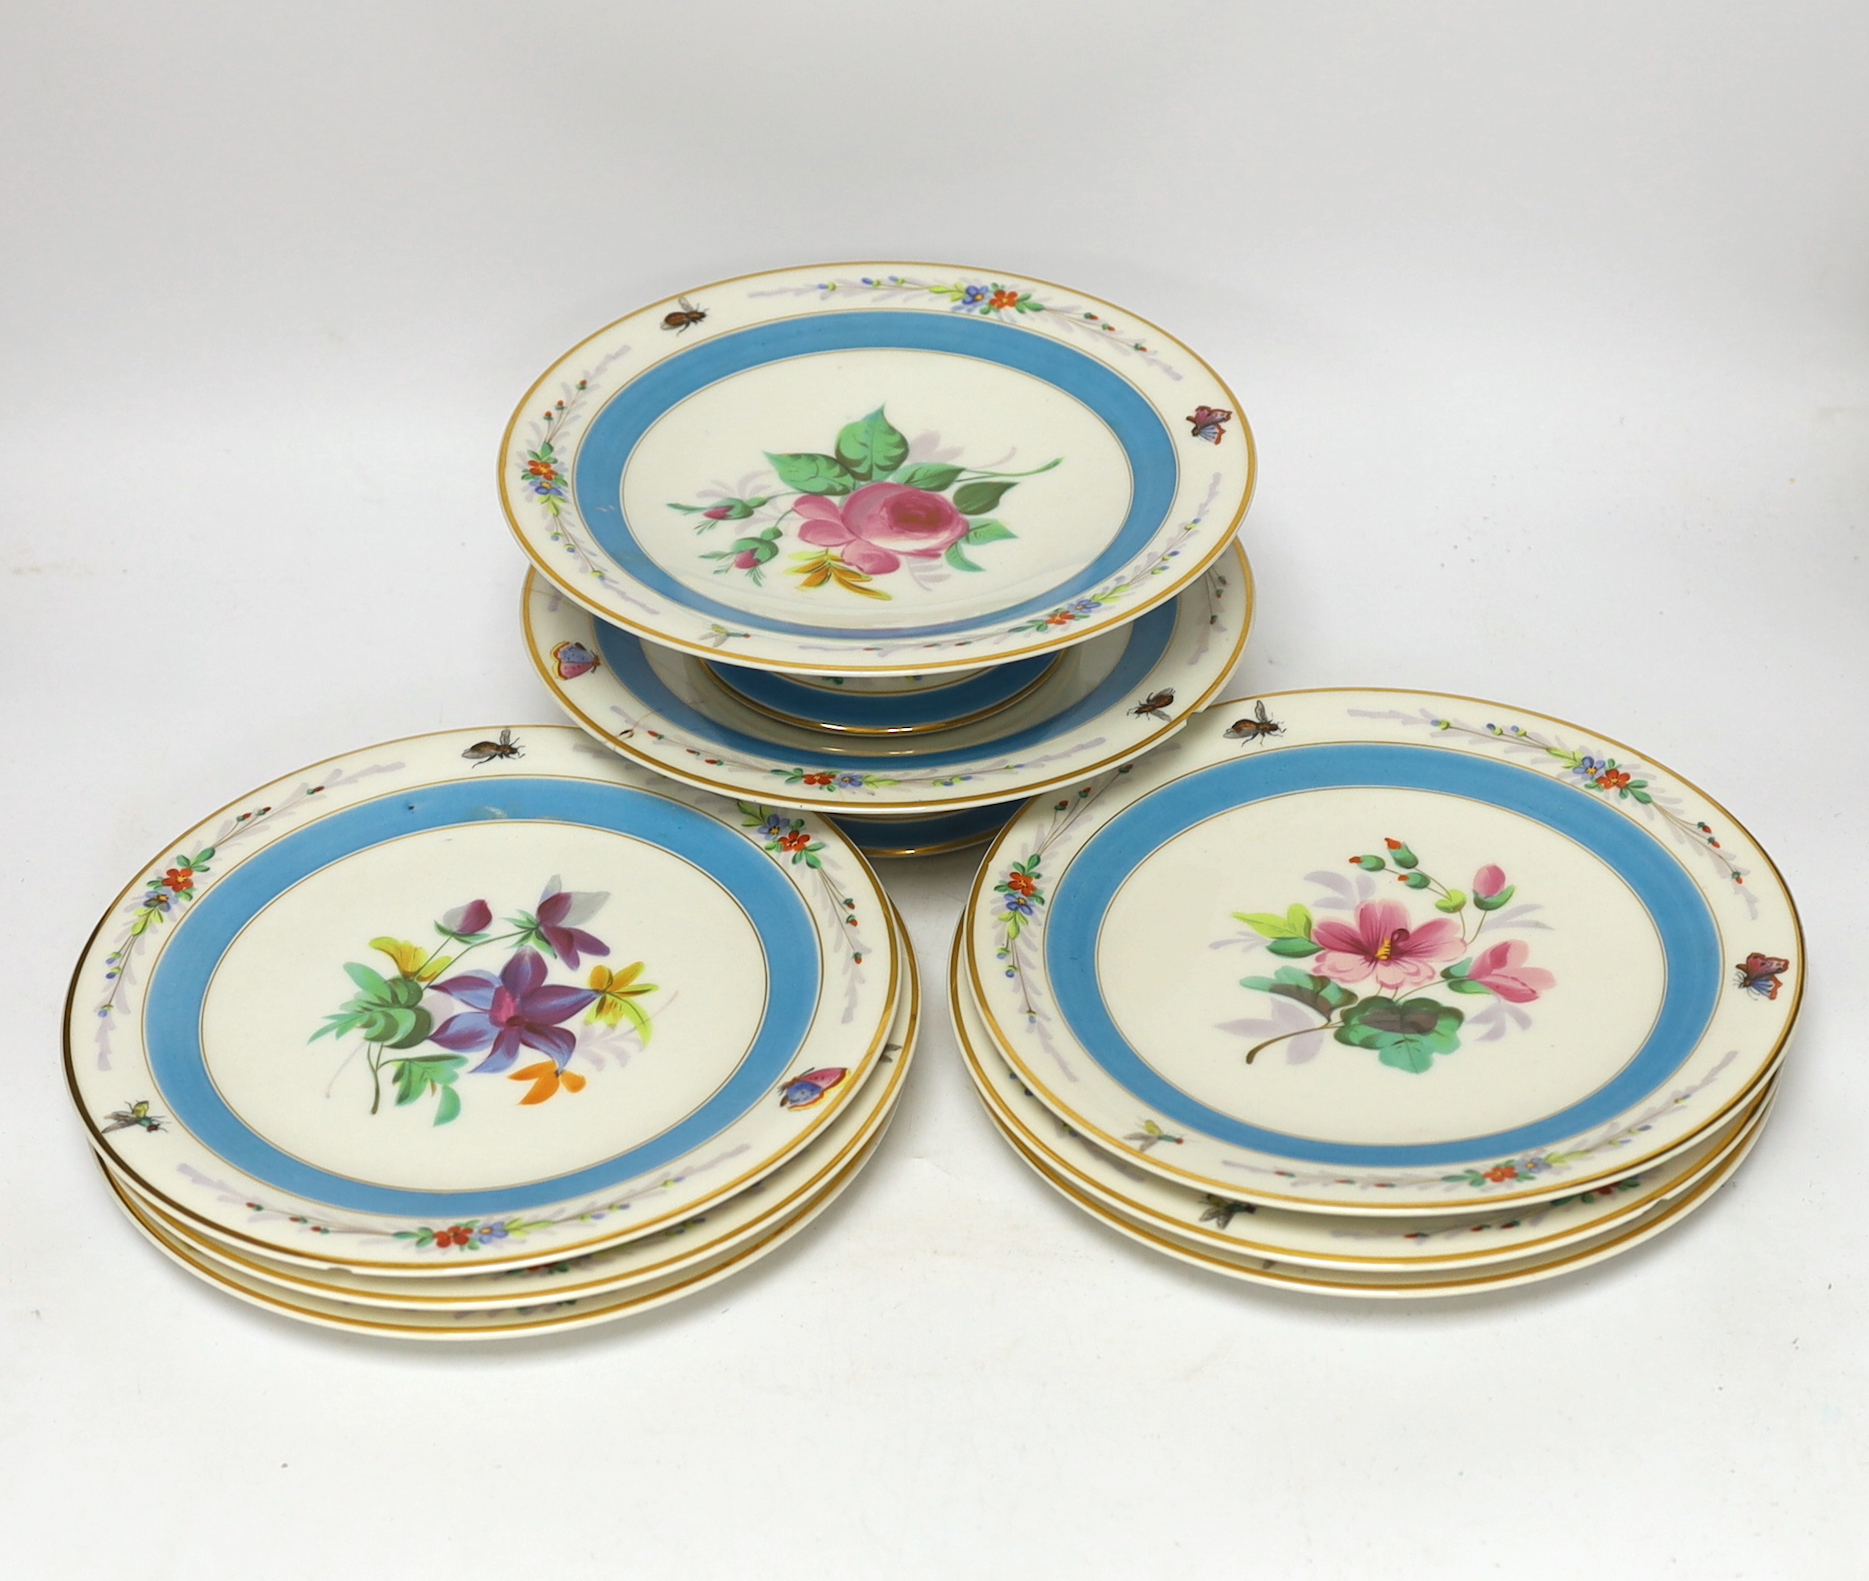 A French mid 19th century floral dessert set, with six plates and two pedestal dishes